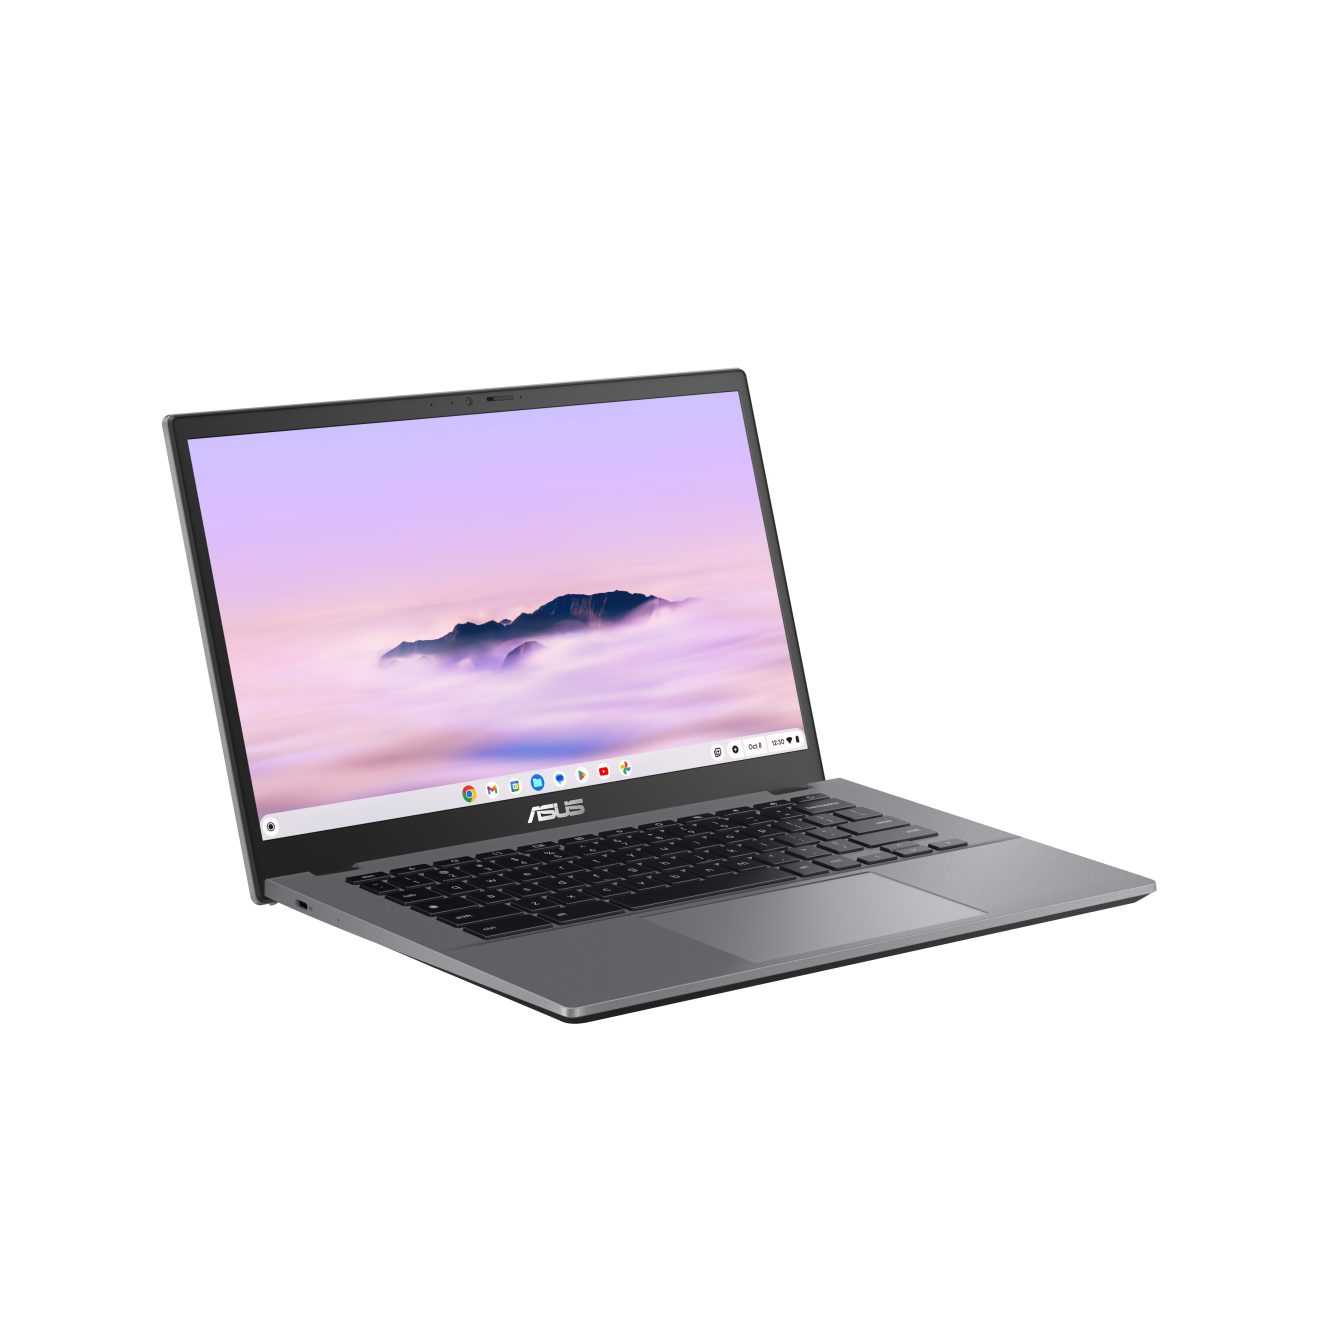 ASUS Chromebook Plus (CX3402), power and security for everyone